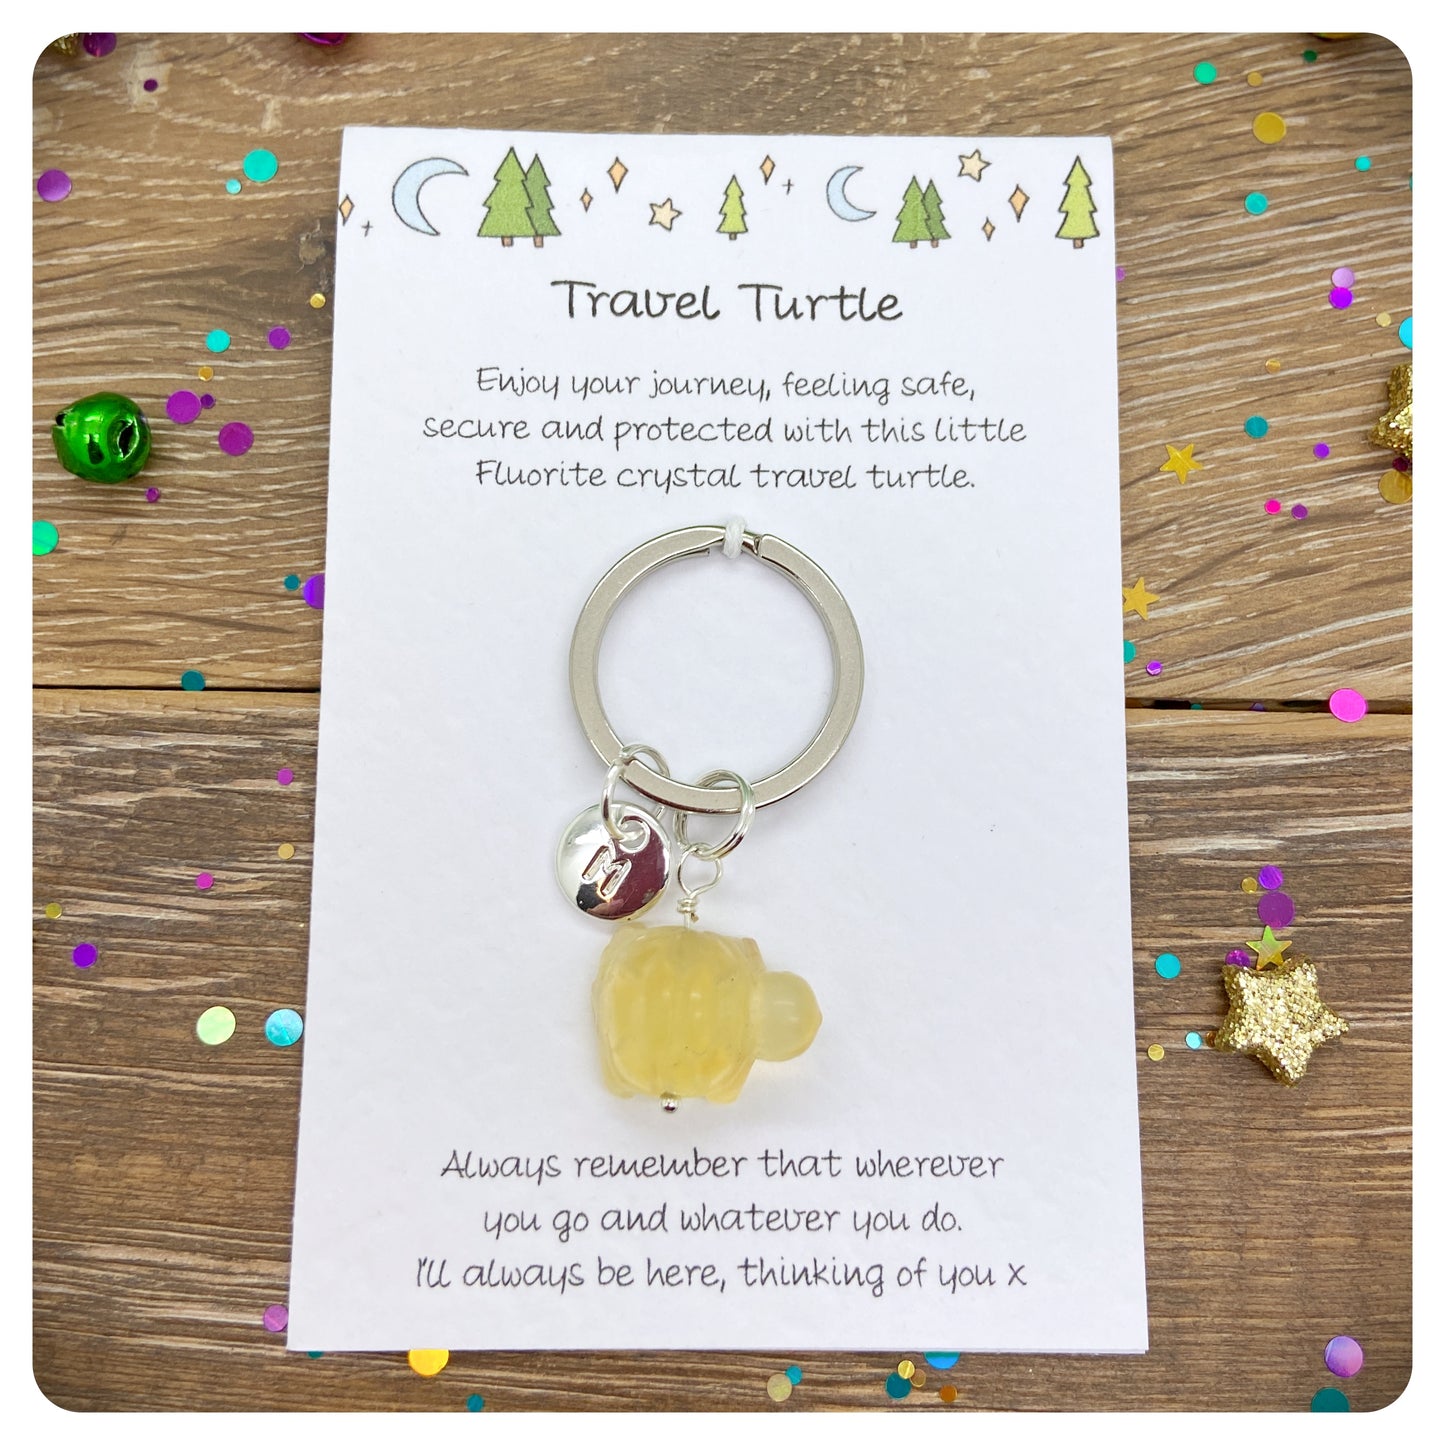 Crystal Travel Turtle Keychain For Safe Travels Personalised Safe Travel Necklace Travelling Gift Travel Protective Keyring For Backpacking